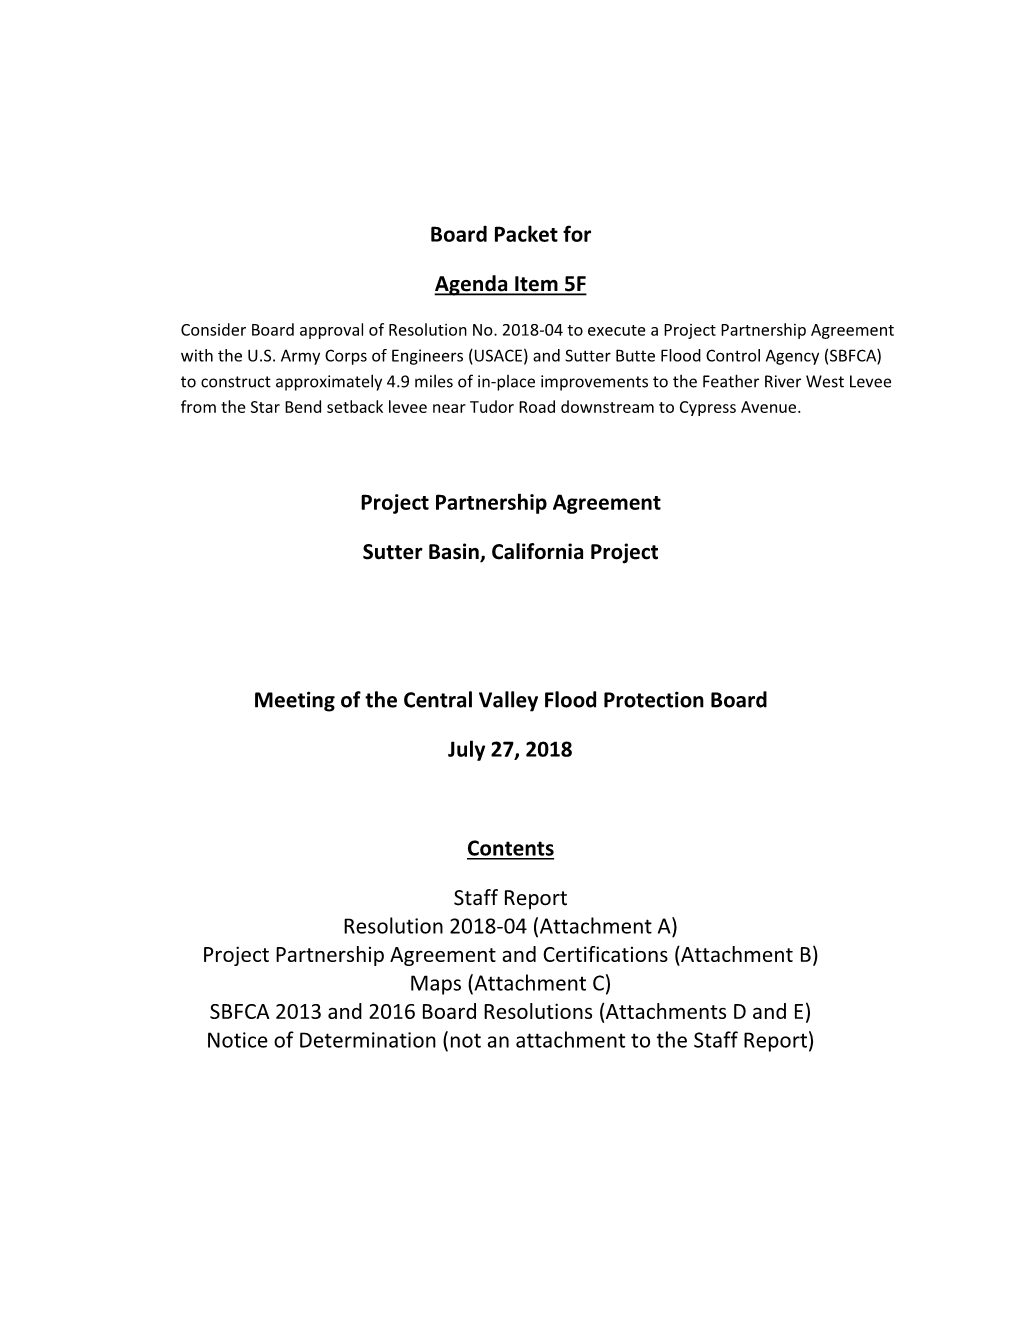 Board Packet for Agenda Item 5F Project Partnership Agreement